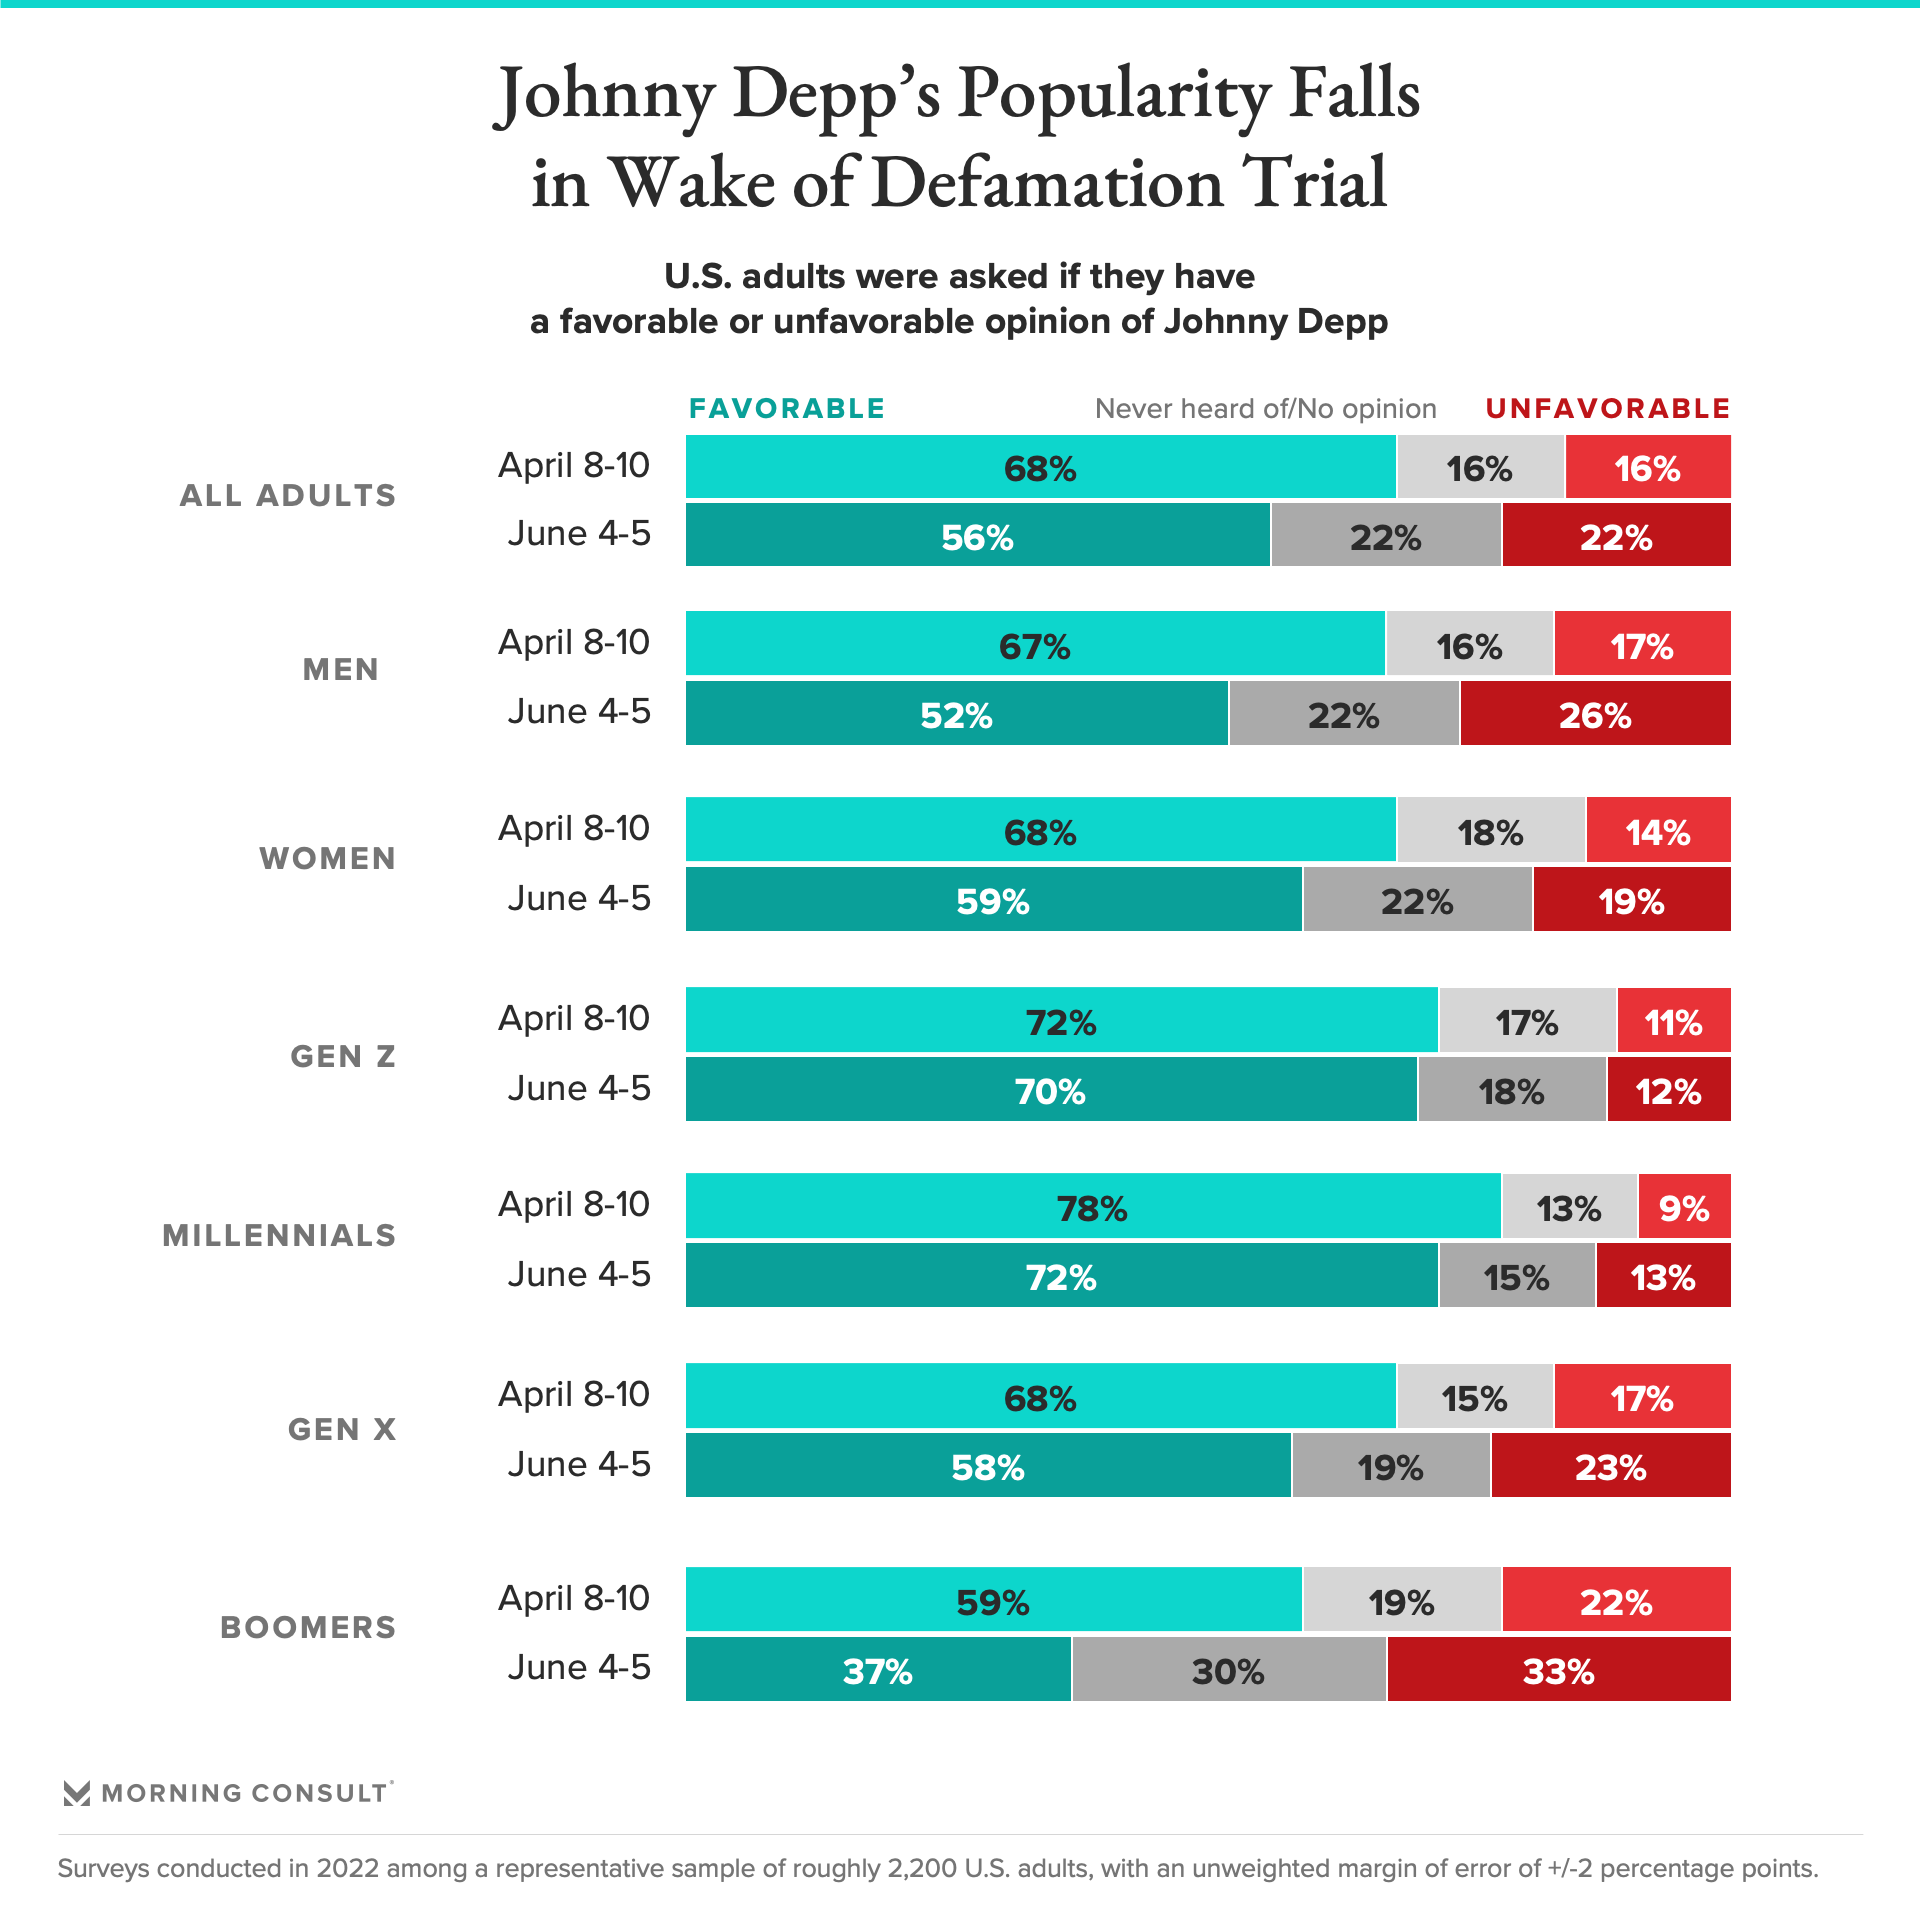 Bar chart showing fall of Johnny Depp's popularity following defamation trial